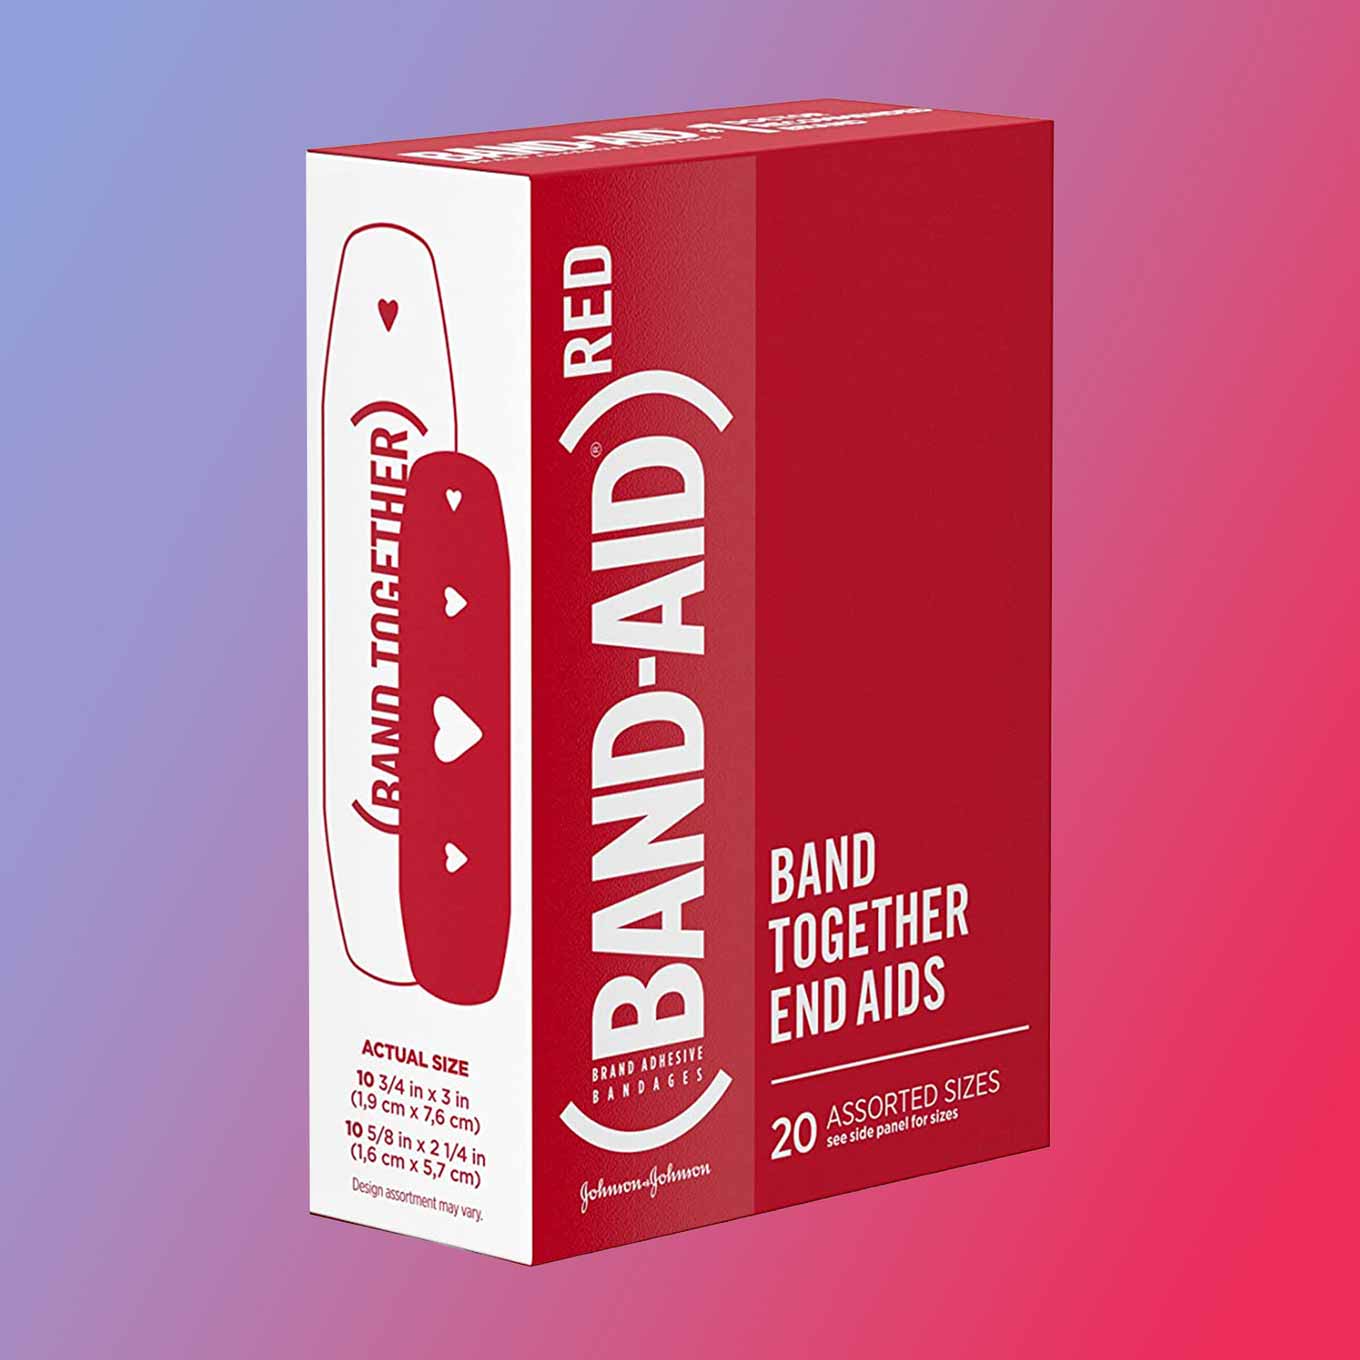 Red box of Band-Aids that says "Band Together, End AIDS"